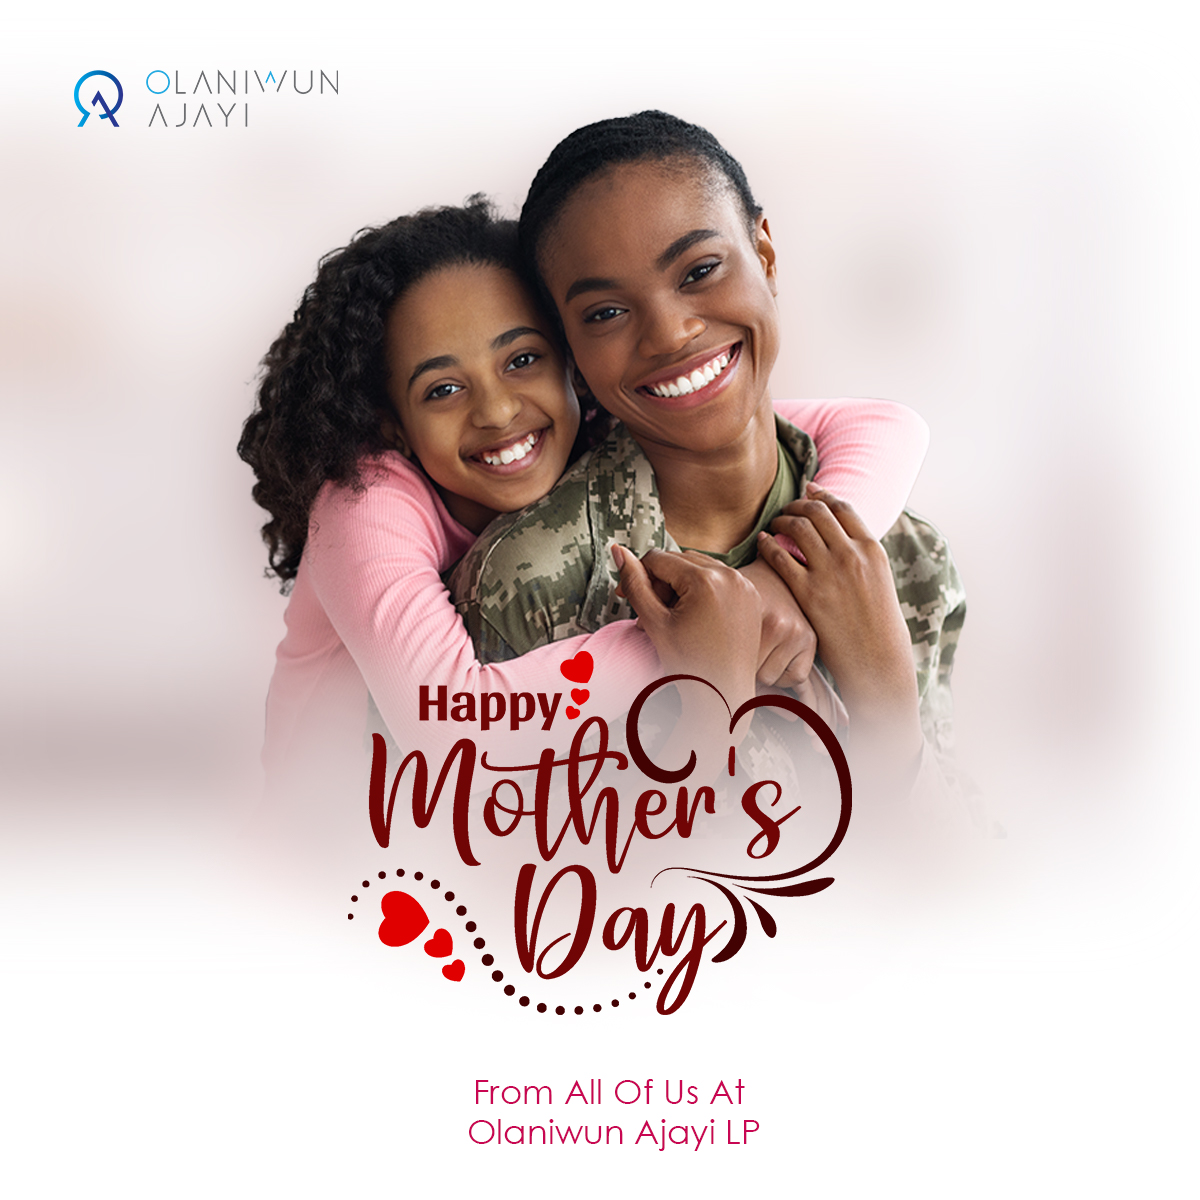 Mothers are our real life superheroes - and today we celebrate them, even more than we do daily!

Happy Mother's day!
.
.
.
#Oalpmothersday #mothers #mothersday2023 #motheringsunday #celebratingmothers